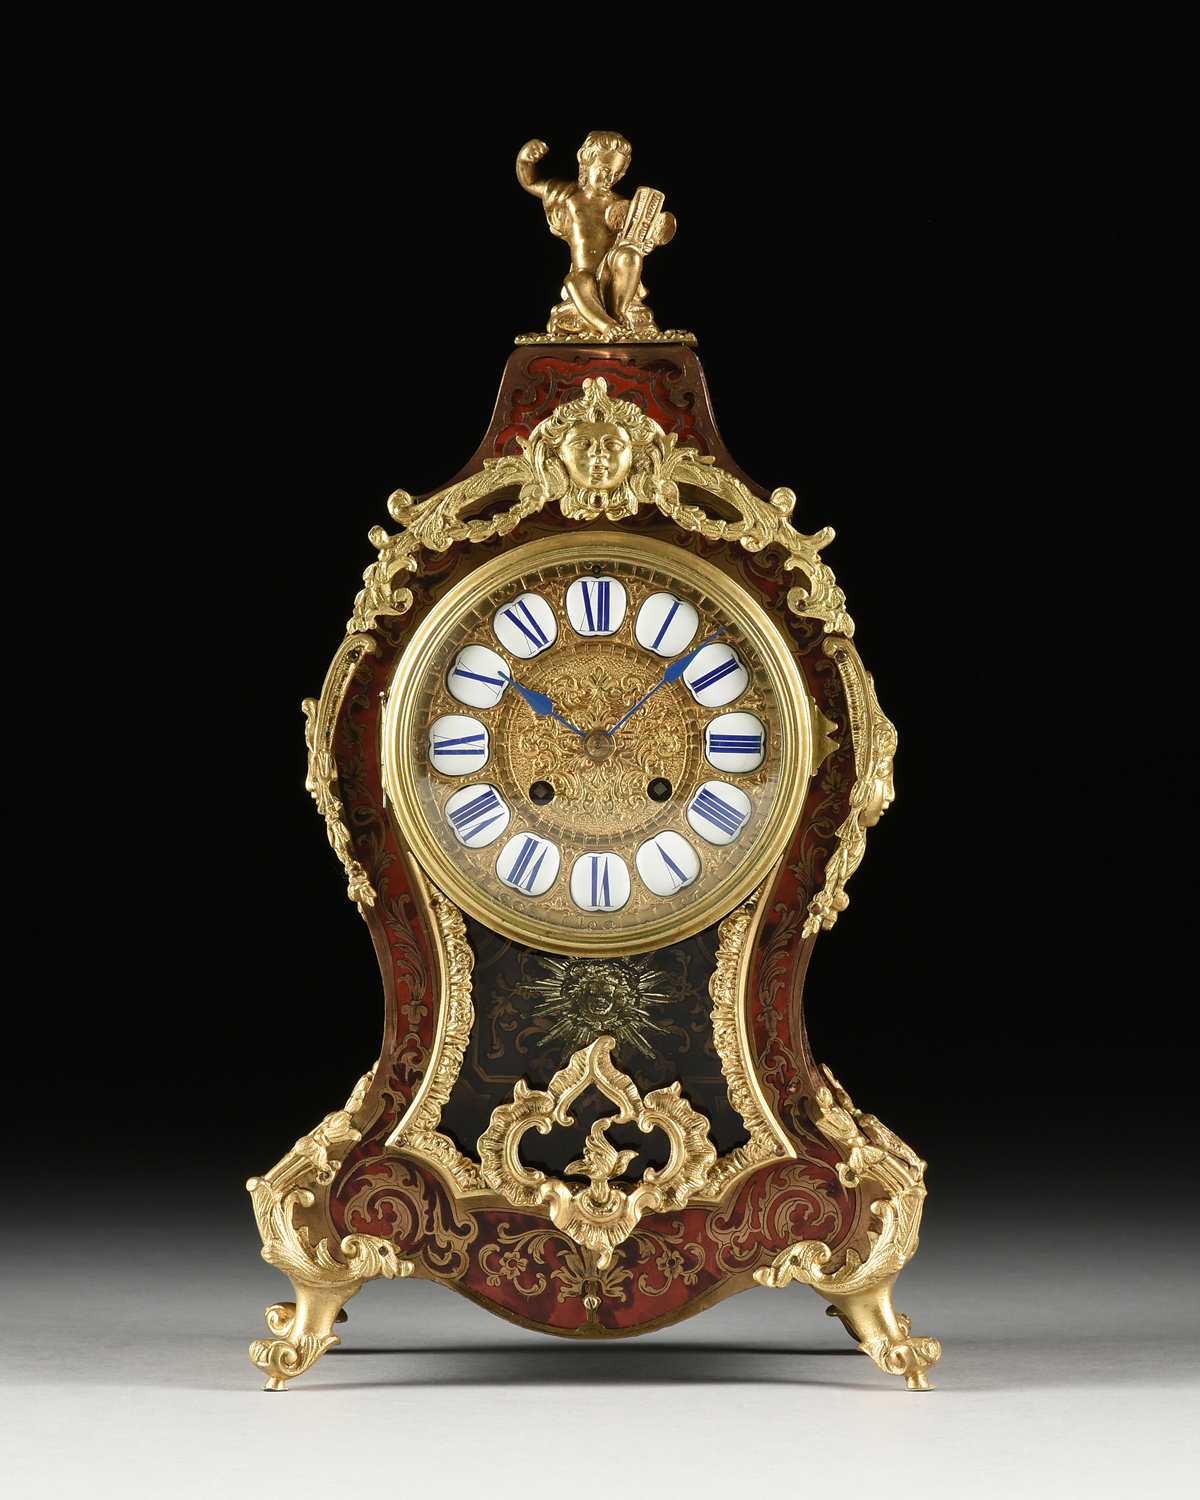 A LOUIS XIV STYLE ORMOLU MOUNTED BOULLE MARQUETRY BRACKET CLOCK, LATE 19TH CENTURY, the short